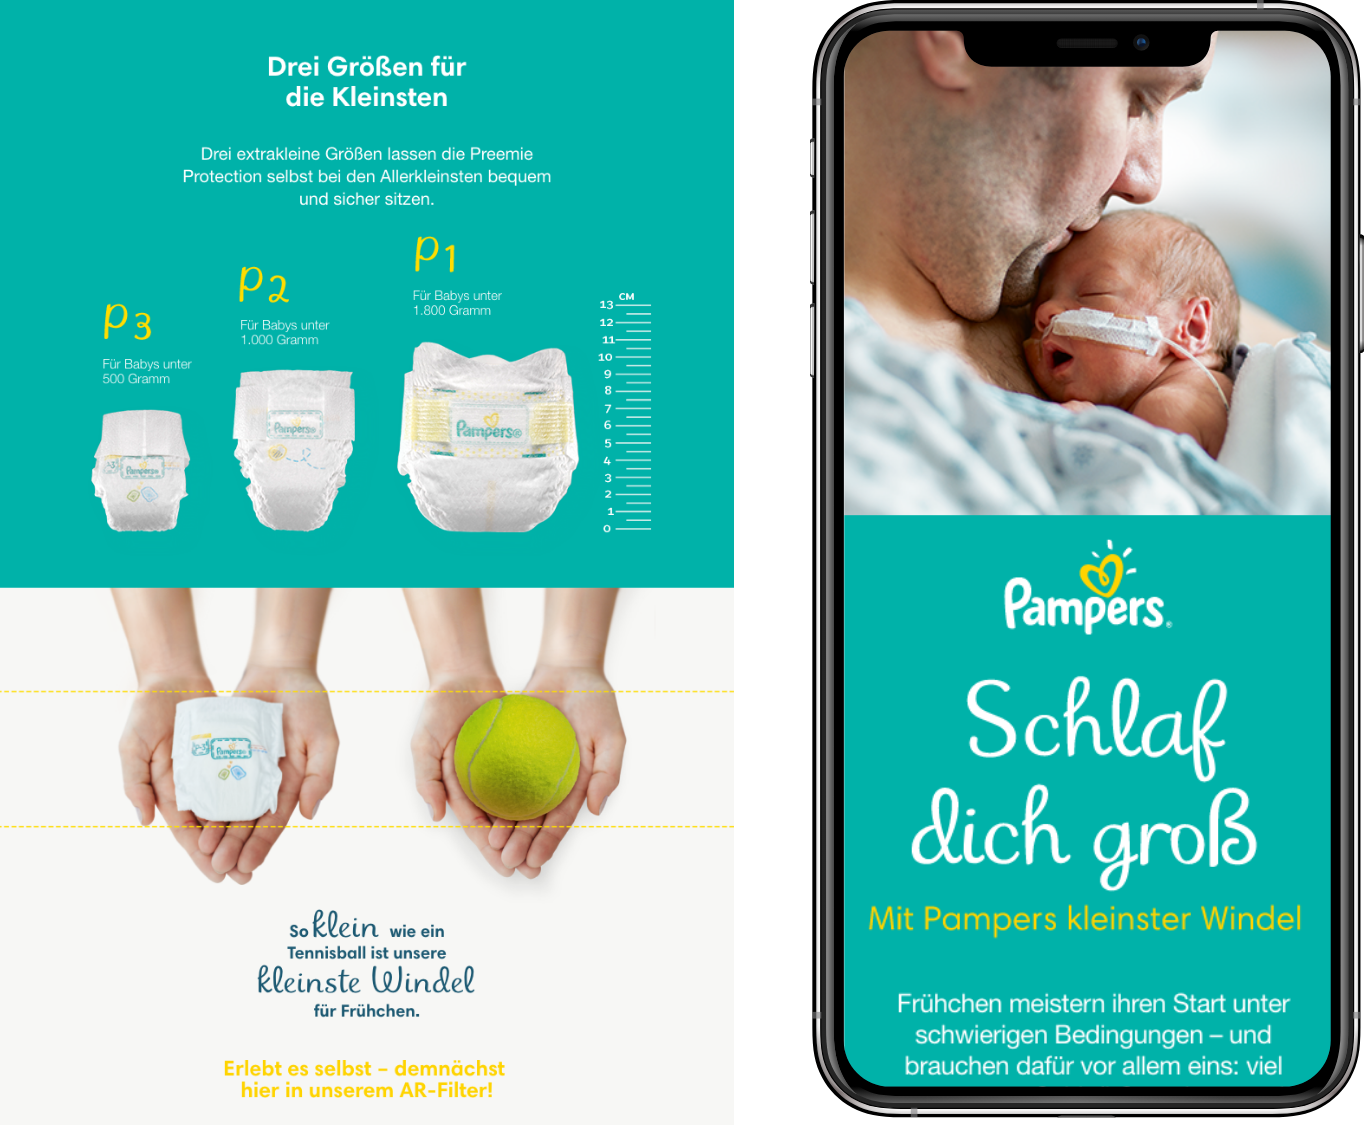 Advertising and mobile screen for Pampers "Sleep yourself big"